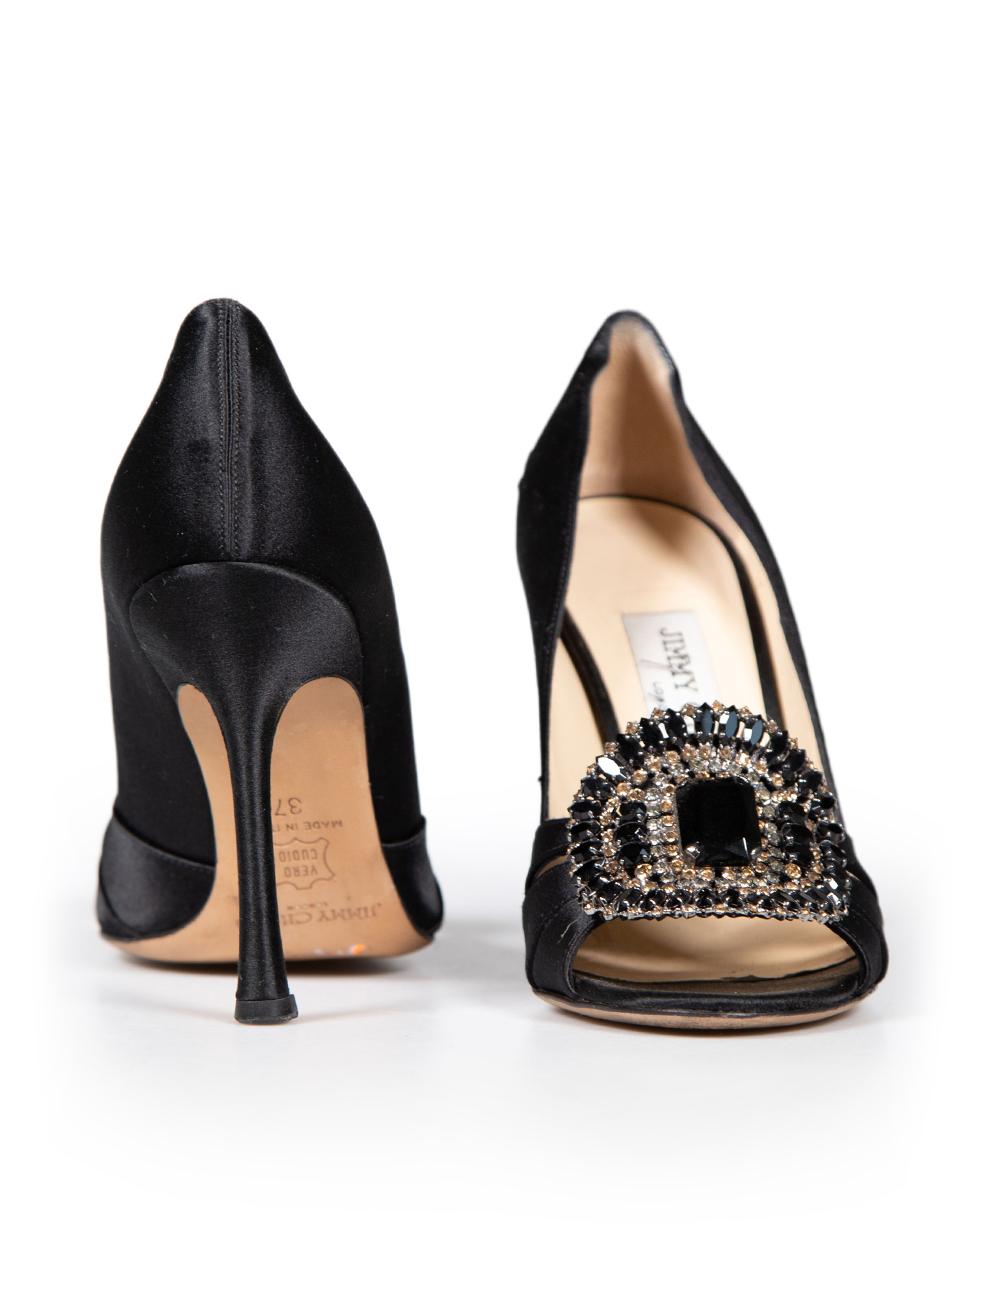 Jimmy Choo Black Satin Crystal Detail Heels Size IT 37 In Good Condition For Sale In London, GB